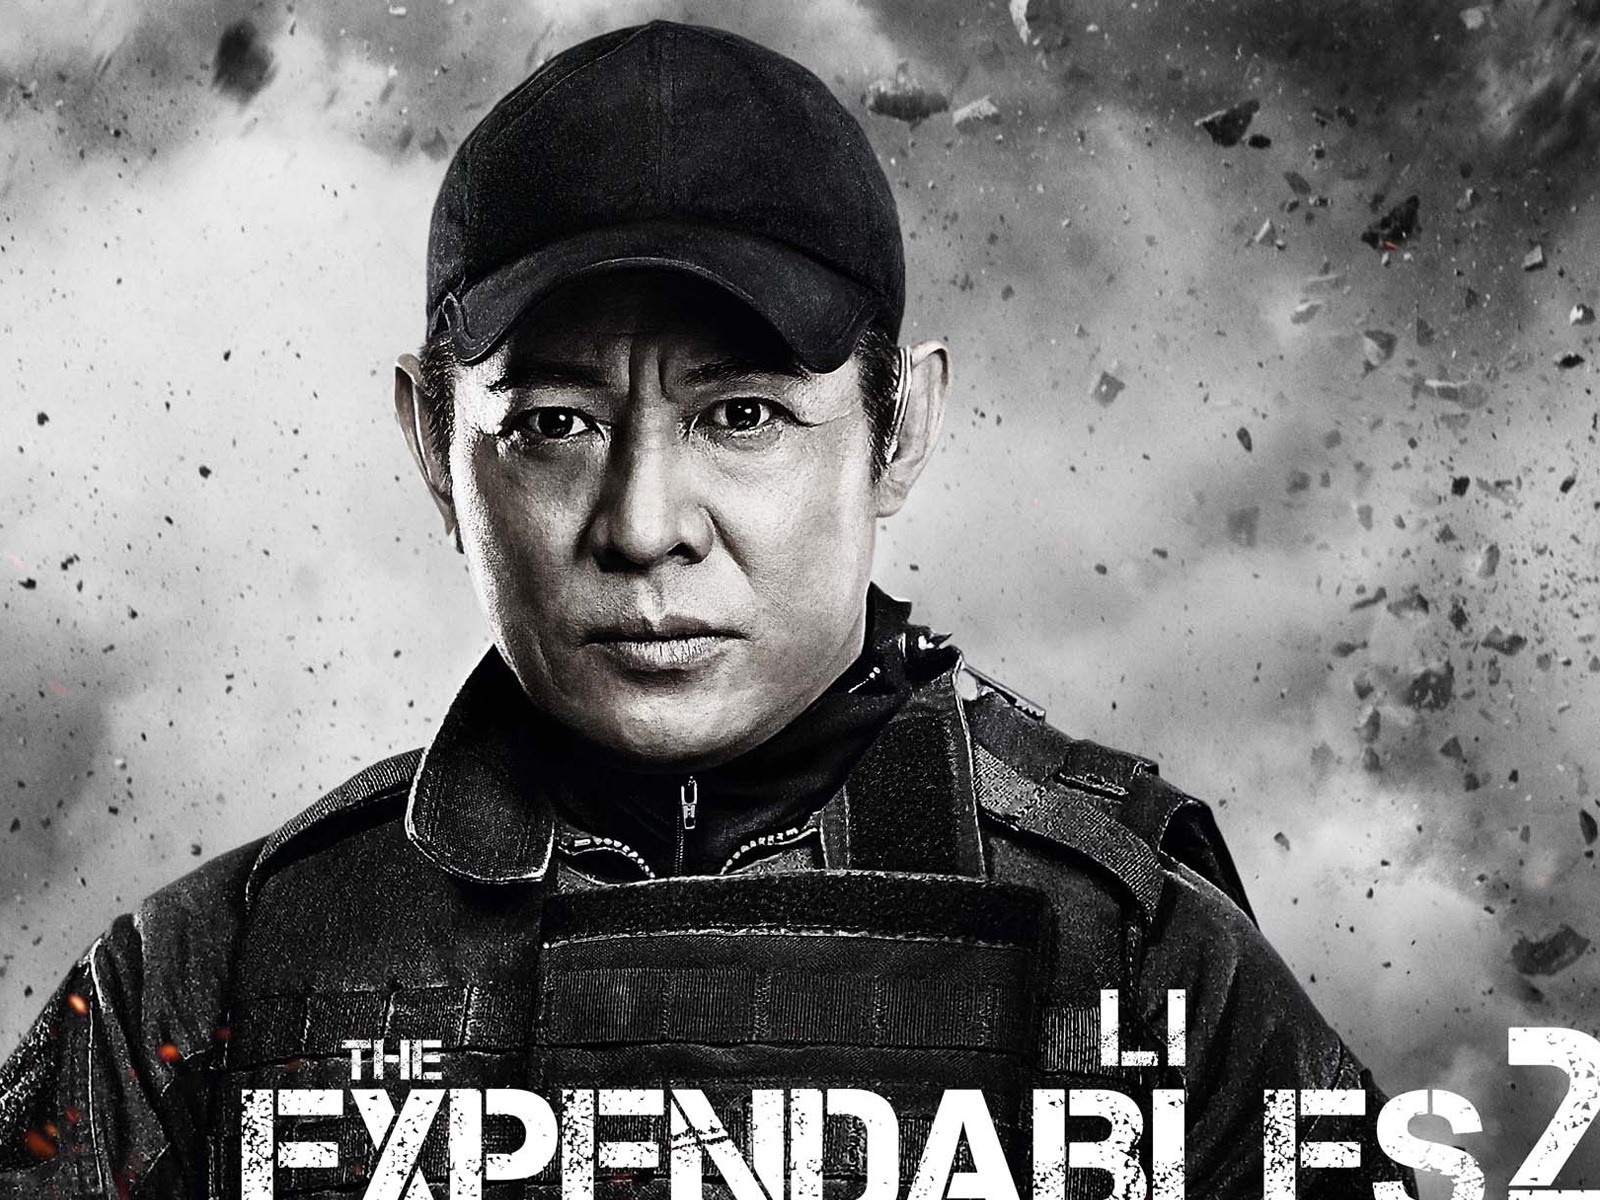 2012 Expendables2 HDの壁紙 #16 - 1600x1200